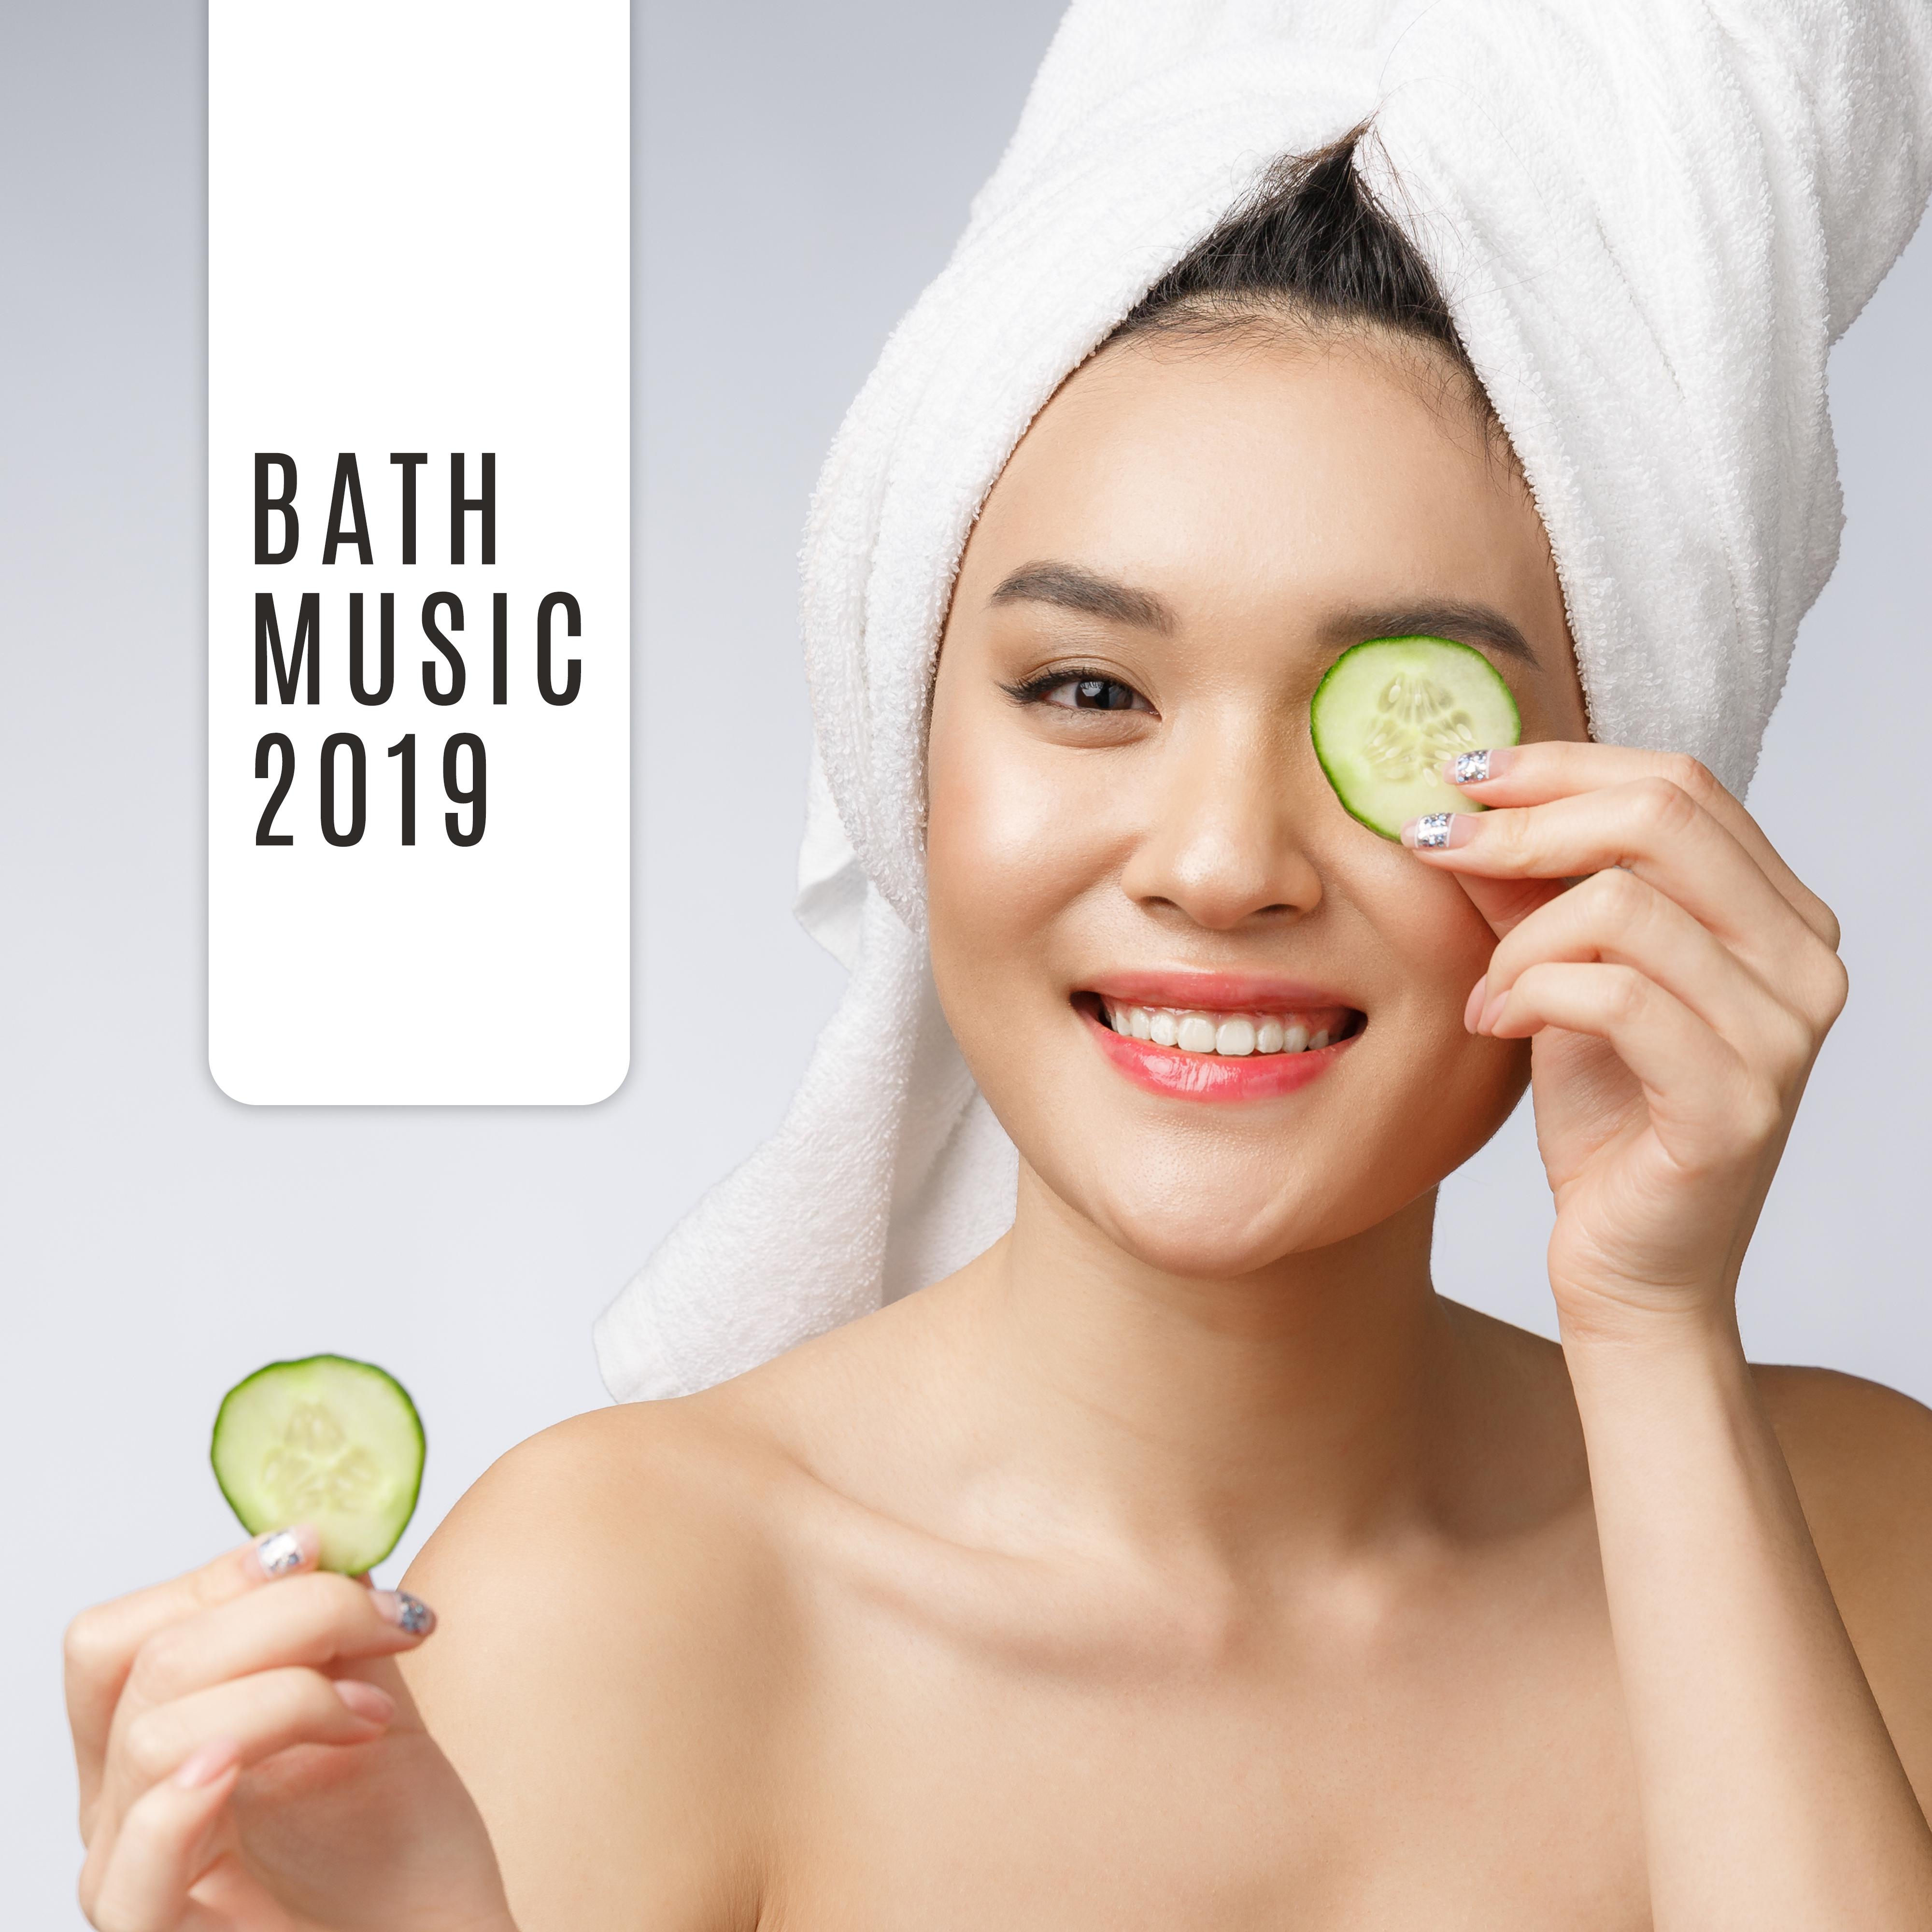 Bath Music 2019 – Spa Chillout, Massage Music, Relax Zone, Chillout for Bath, Luxury Spa Tunes, Hotel Spa, Pure Relaxation, Zen, Chillout Lounge